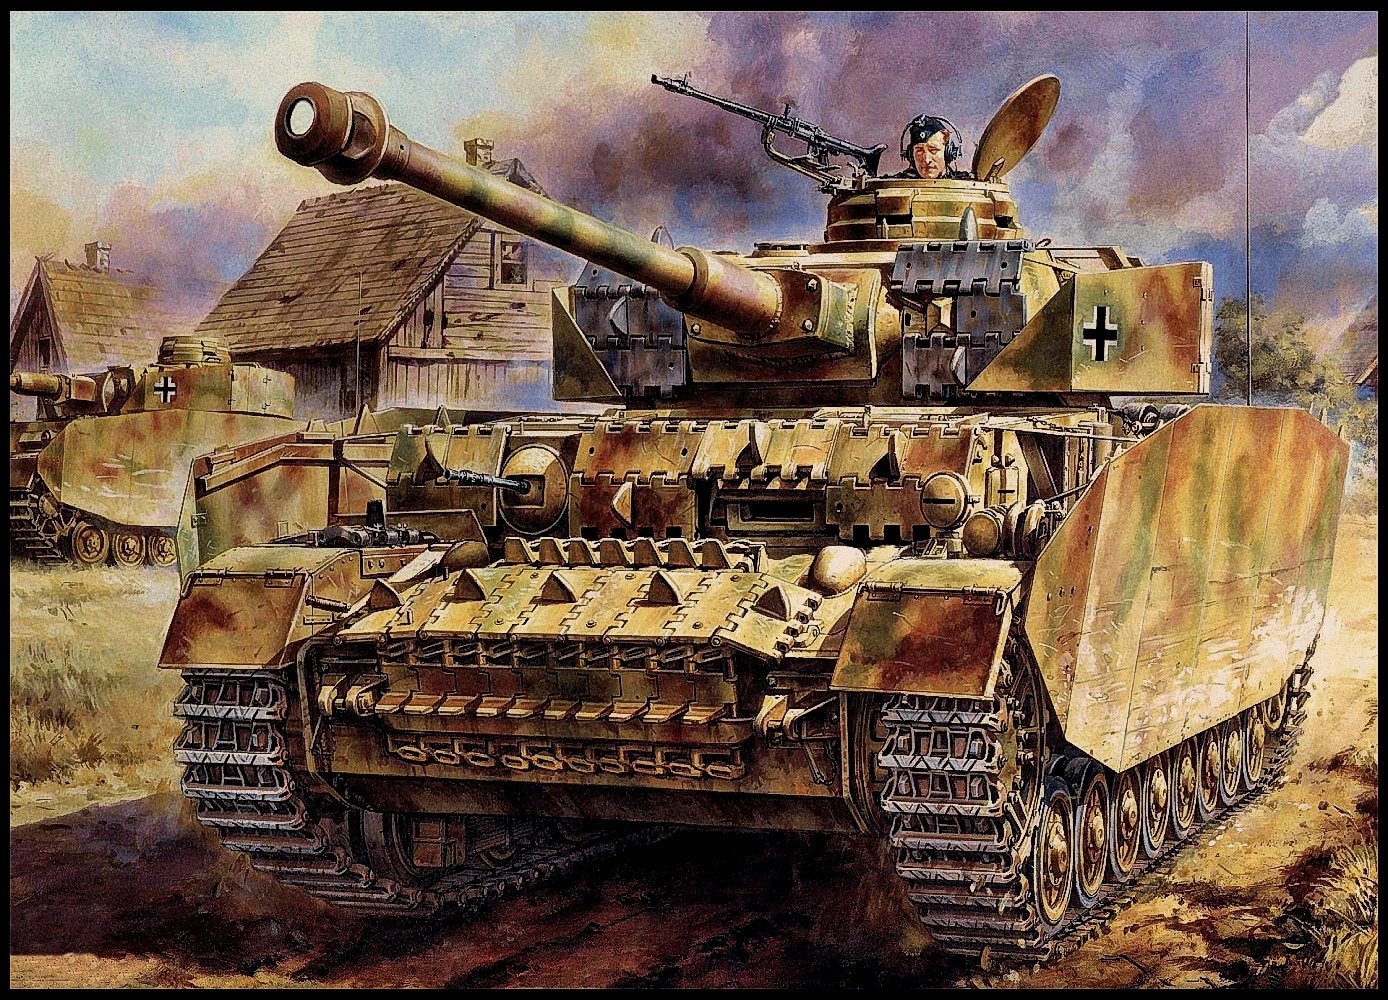 German Panzer IV with a Long 75mm gun Wallpaper Wall Decor WW II Wehrmacht Military Art Poster Vintage Painting Wall Sticker. Wall Stickers